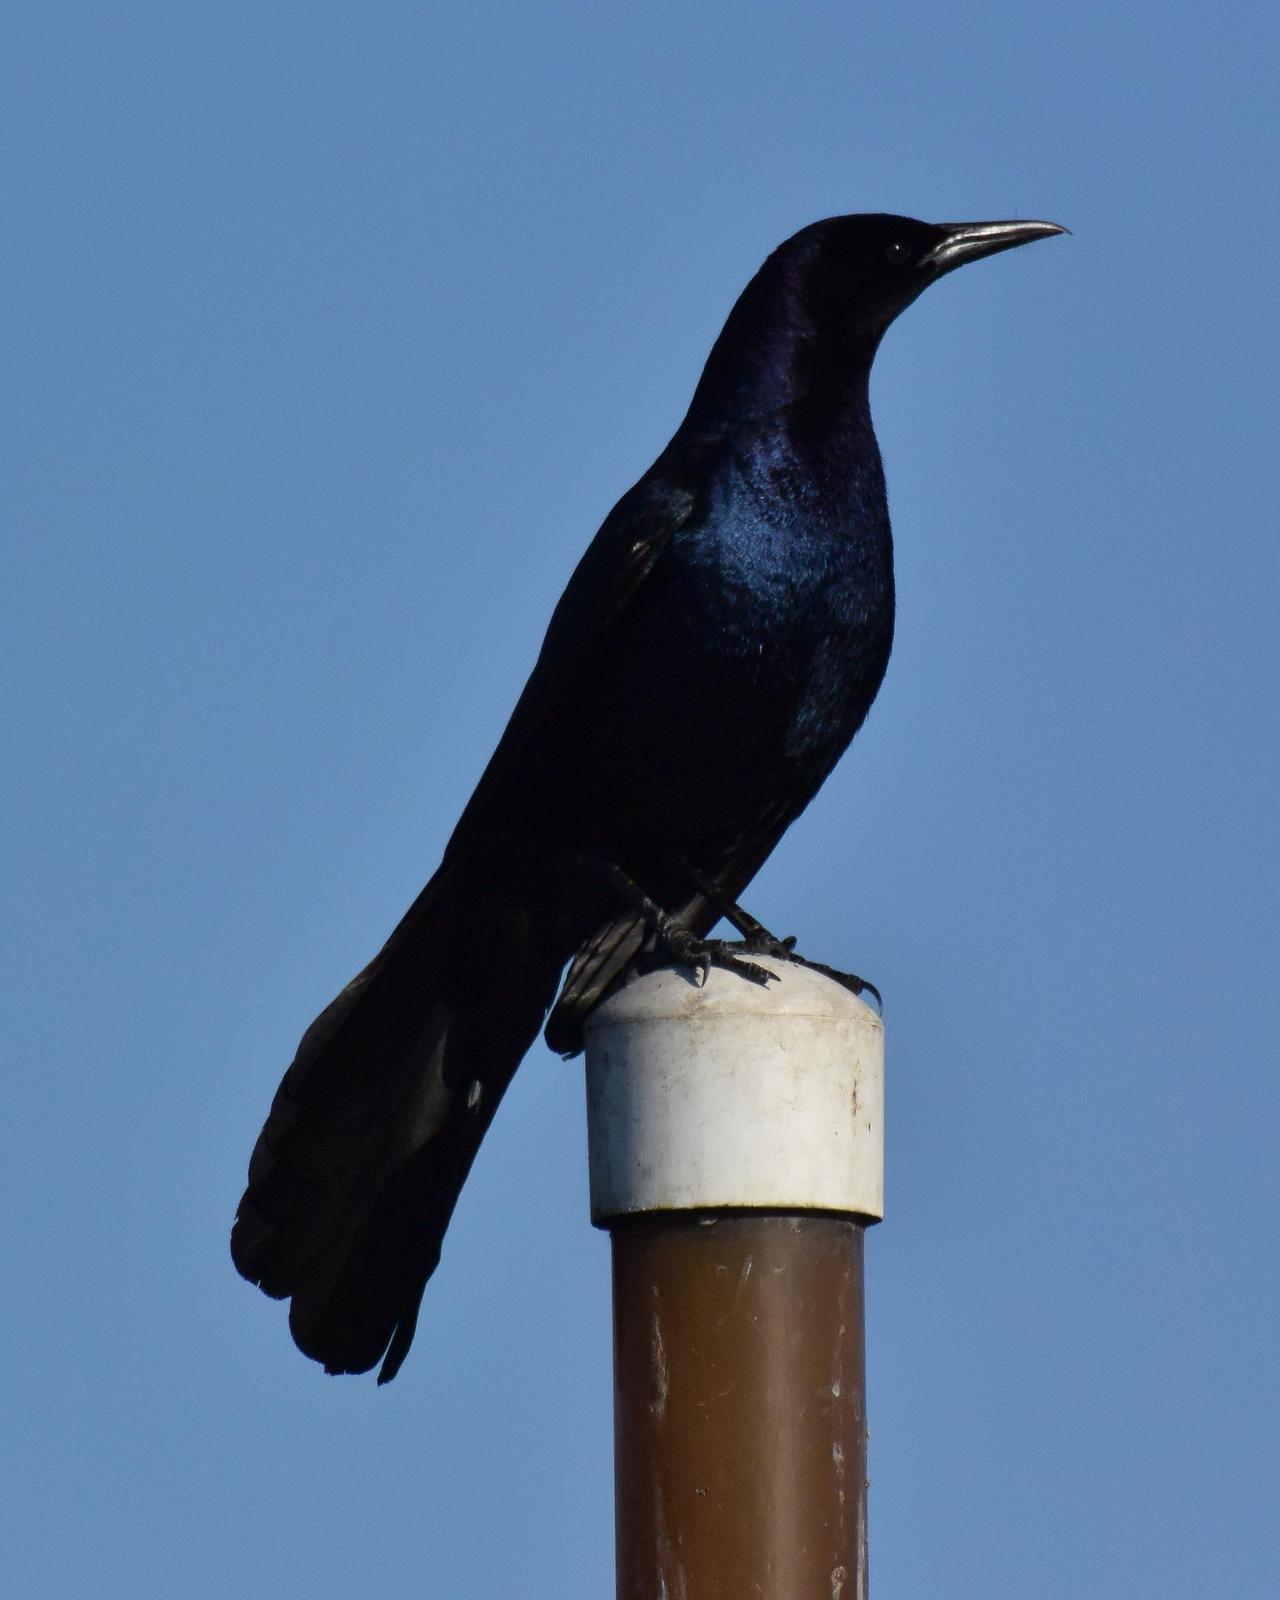 Boat-tailed Grackle Photo by Emily Percival